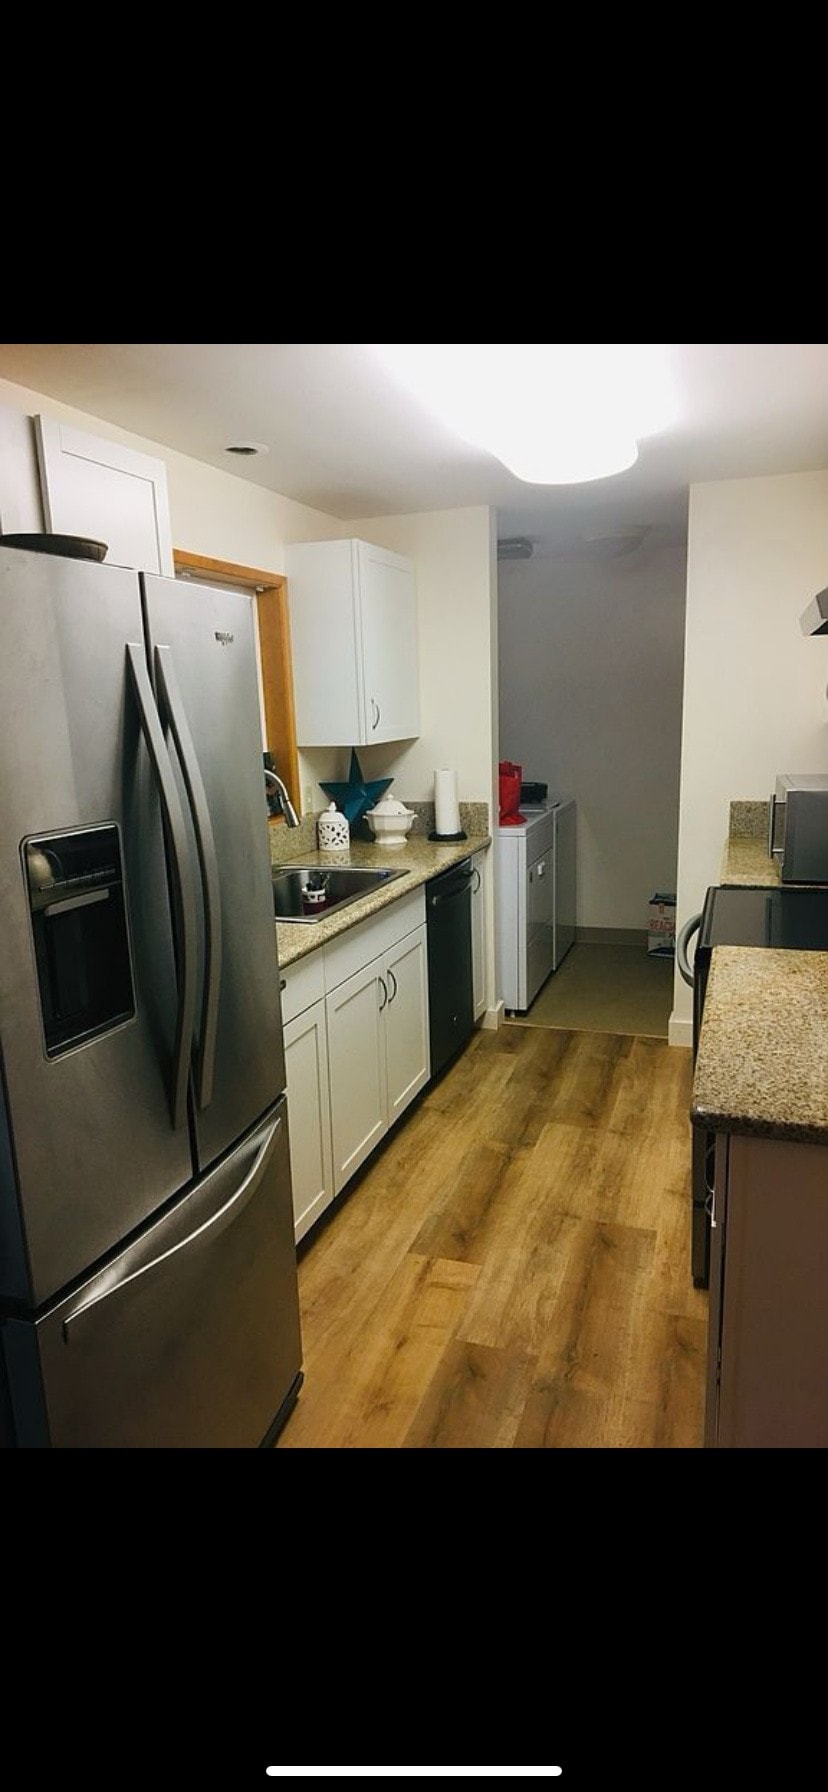 Multifamily home just ten min to University